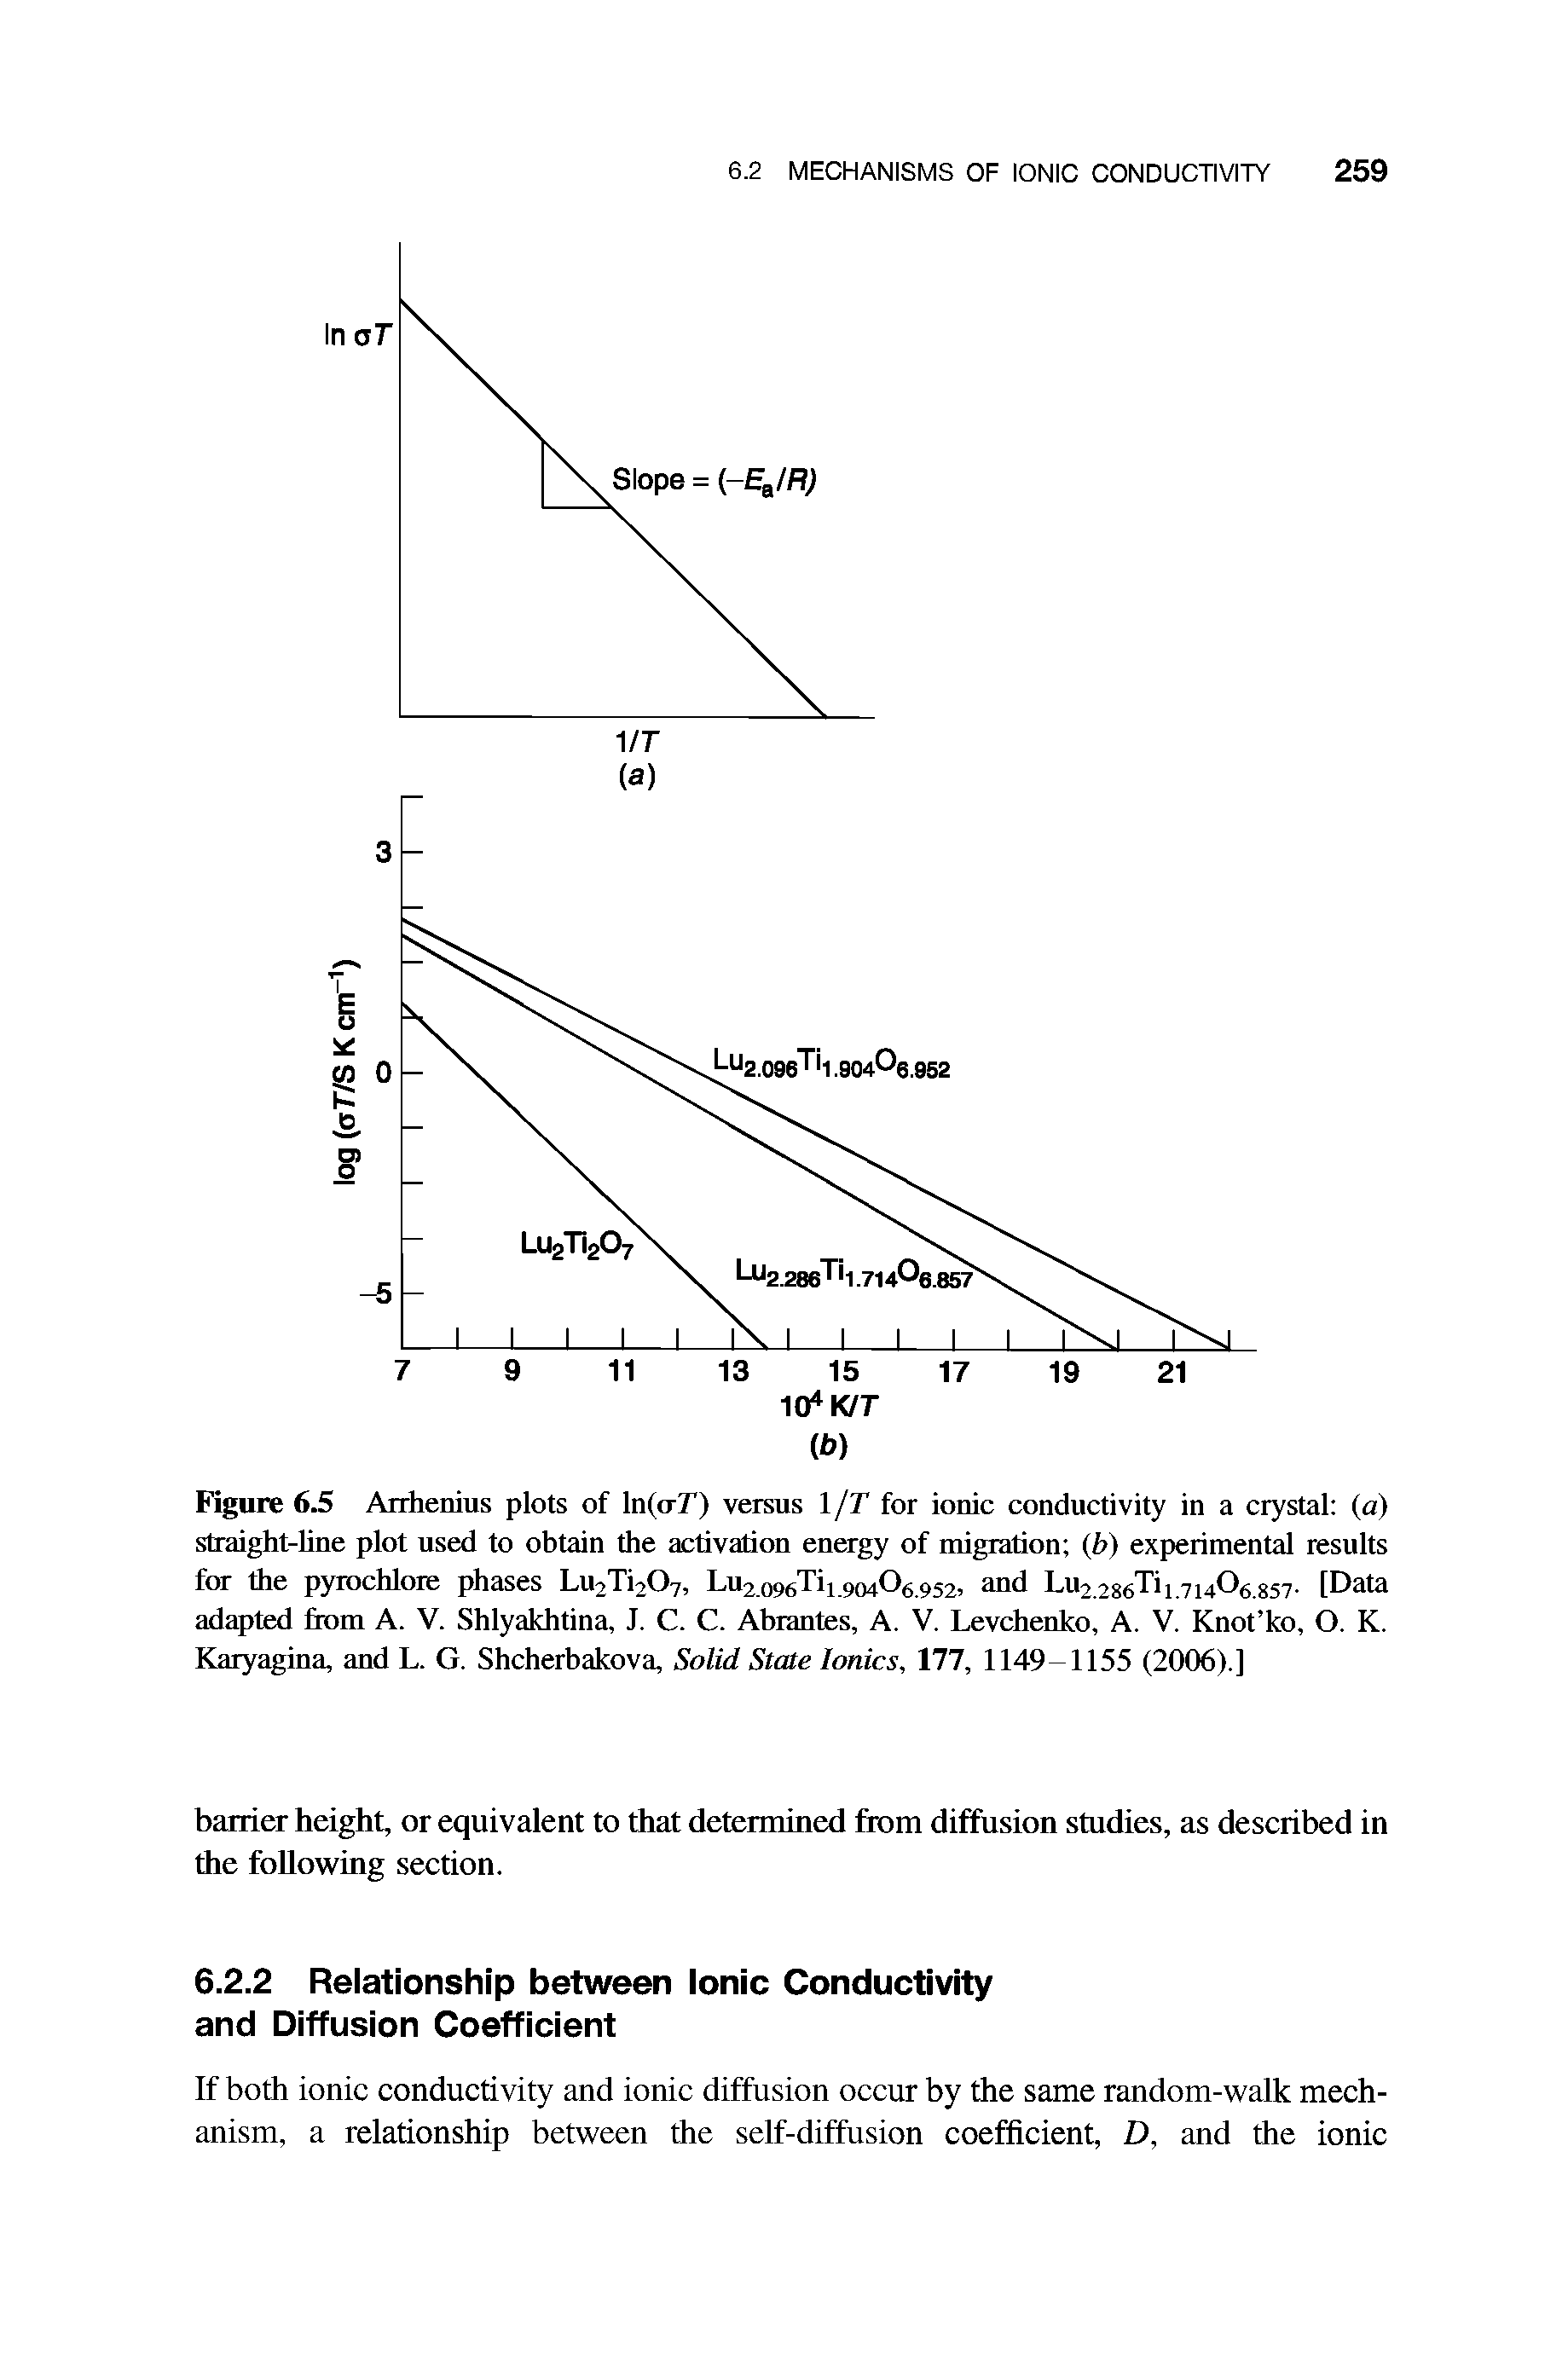 Figure 6.5 Arrhenius plots of ln(<r/ ) versus l/T for ionic conductivity in a crystal (a) straight-line plot used to obtain the activation energy of migration (b) experimental results for the pyrochlore phases Lu2Ti207, Lu2o Tij 904O6952, and Lu2.286TiL71406.857. [Data adapted from A. V. Shlyakhtina, J. C. C. Abrantes, A. V. Levchenko, A. V. Knot ko, O. K. Karyagina, and L. G. Shcherbakova, Solid State Ionics, 177, 1149-1155 (2006).]...